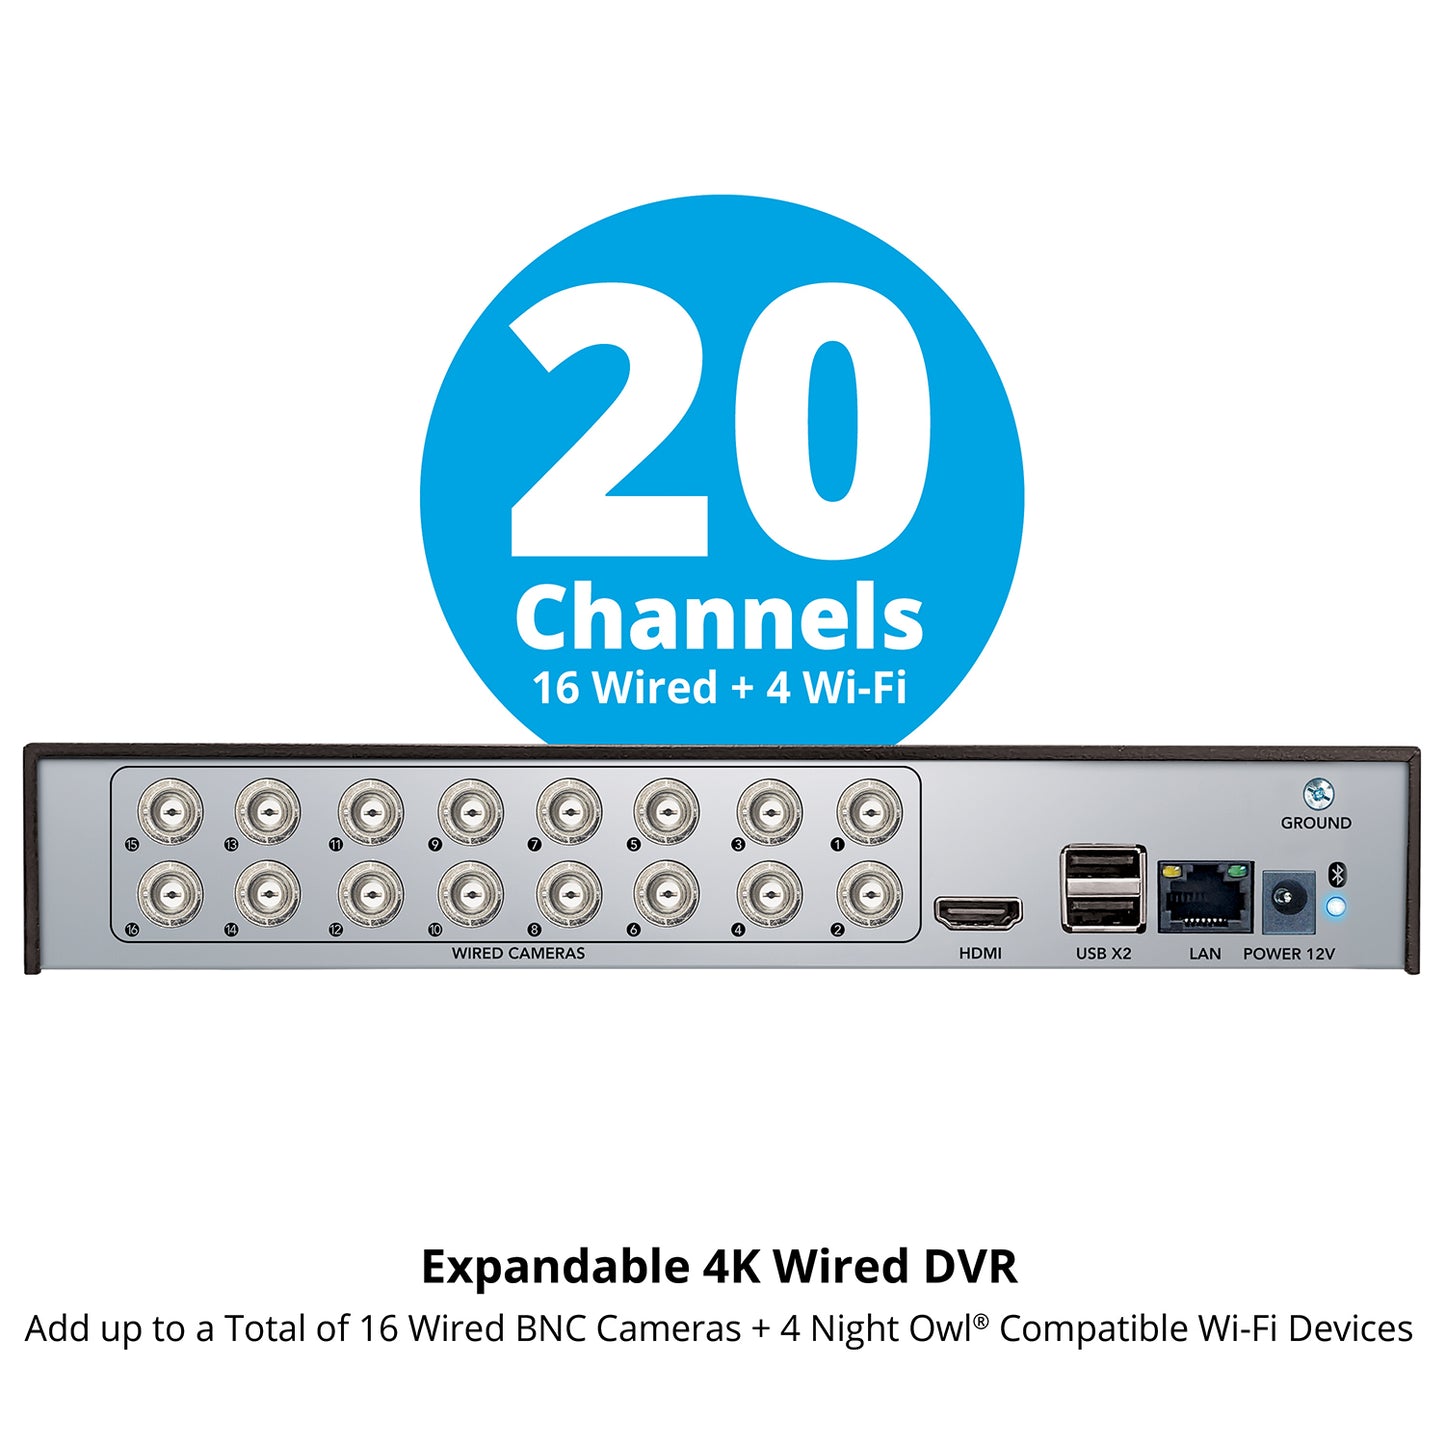 2-Way Audio 20 Channel DVR Security System with 2TB Hard Drive and 12 Wired 4K Deterrence Cameras